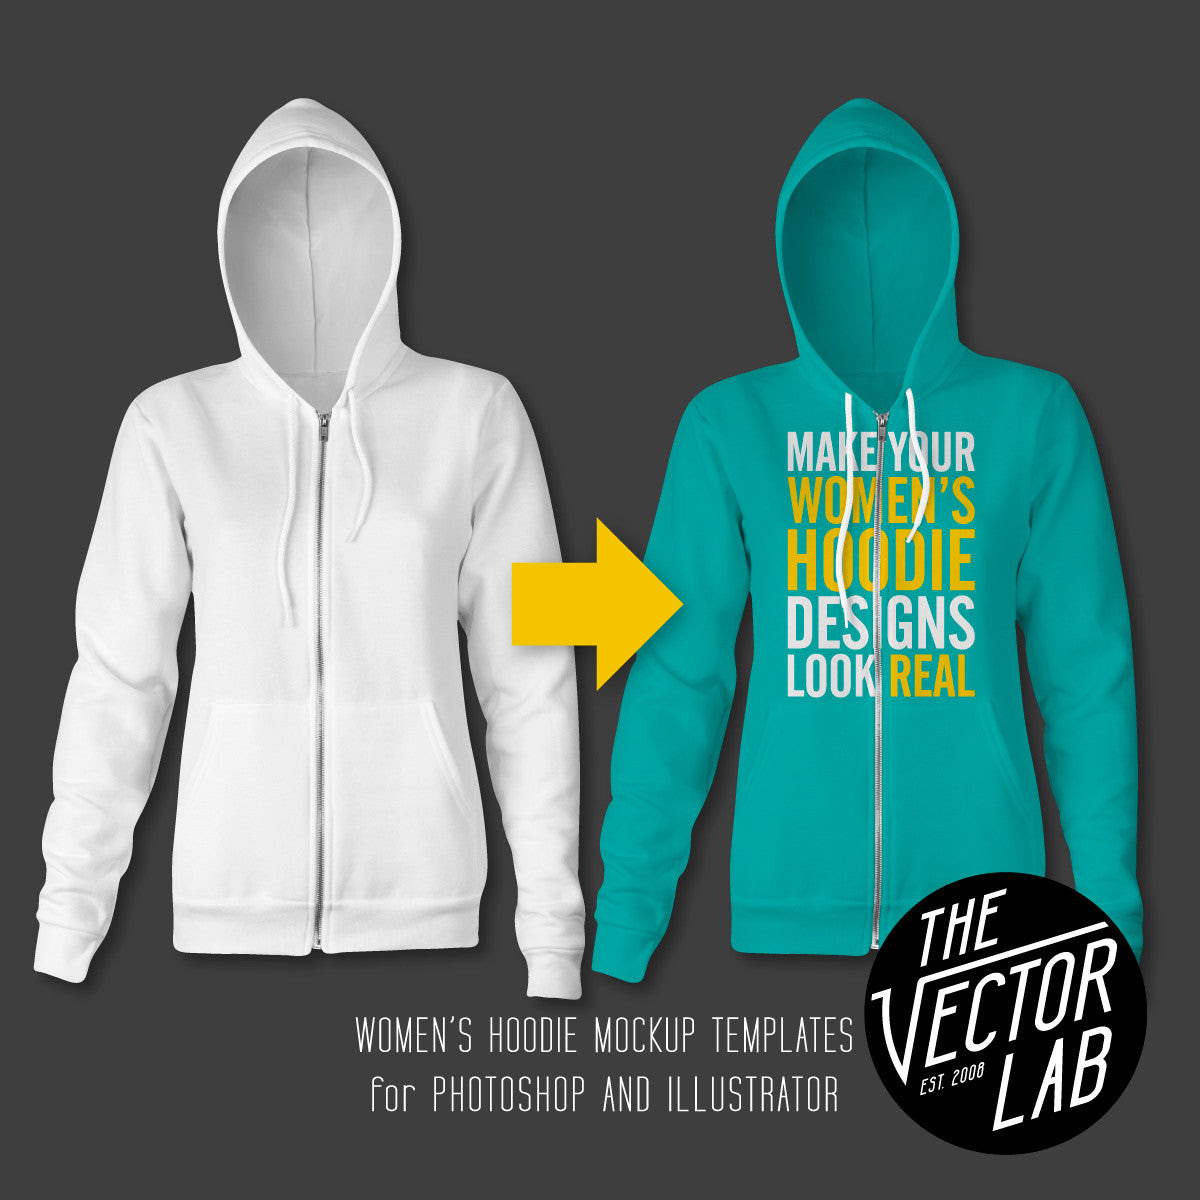 Download Women's Hoodie Mockup Templates - TheVectorLab